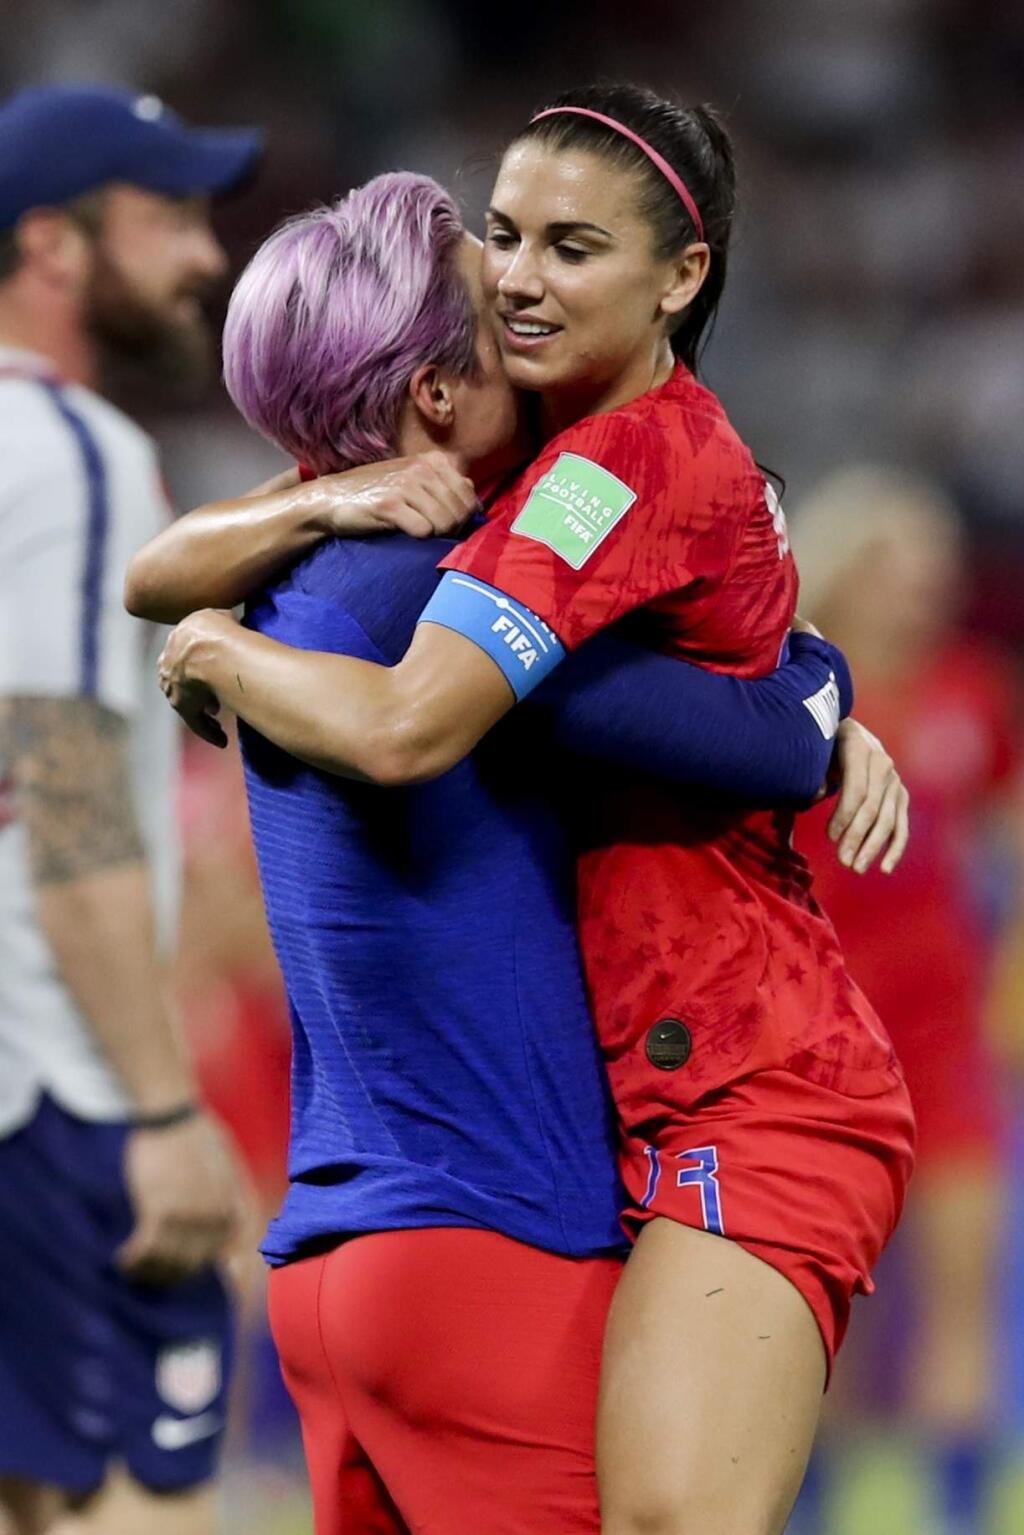 United States' Megan Rapinoe, left, celebrates with teammate Alex Morgan their team's victory against England after the Women's World Cup semifinal soccer match at the Stade de Lyon outside Lyon, France, Tuesday, July 2, 2019. (AP Photo/Francisco Seco)